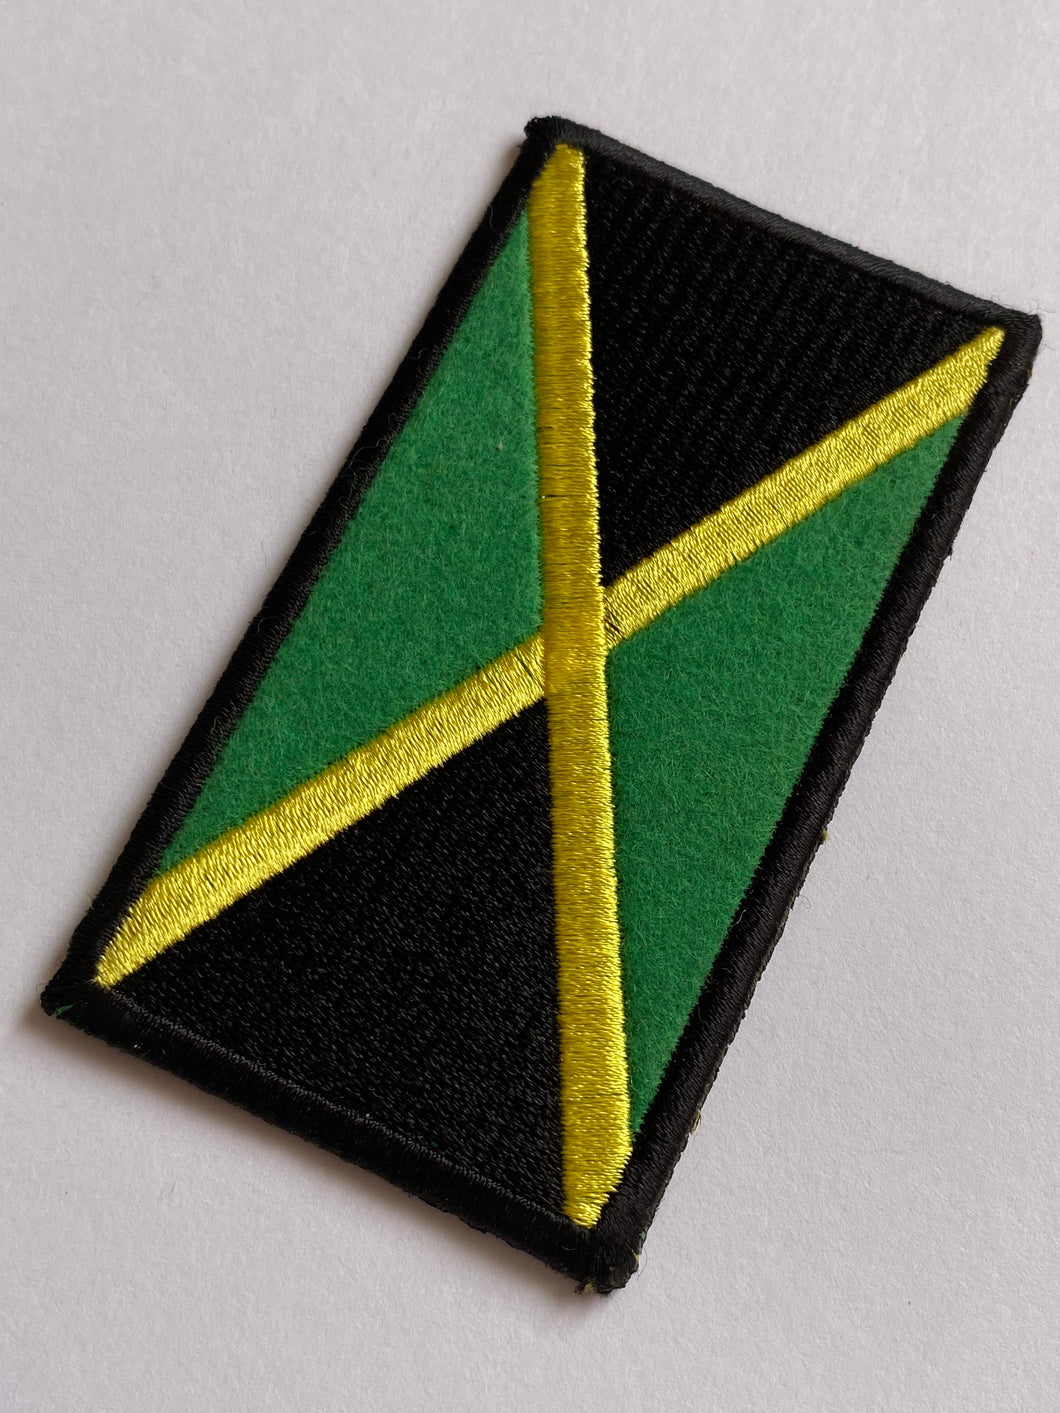 Jamaican Patch Badge 50mm x 90mm Wide Leather Jackets Coats Jeans Dresses Tops Babies Blazers Shirts Skirts Bags Caps Hats Sewing Art Craft